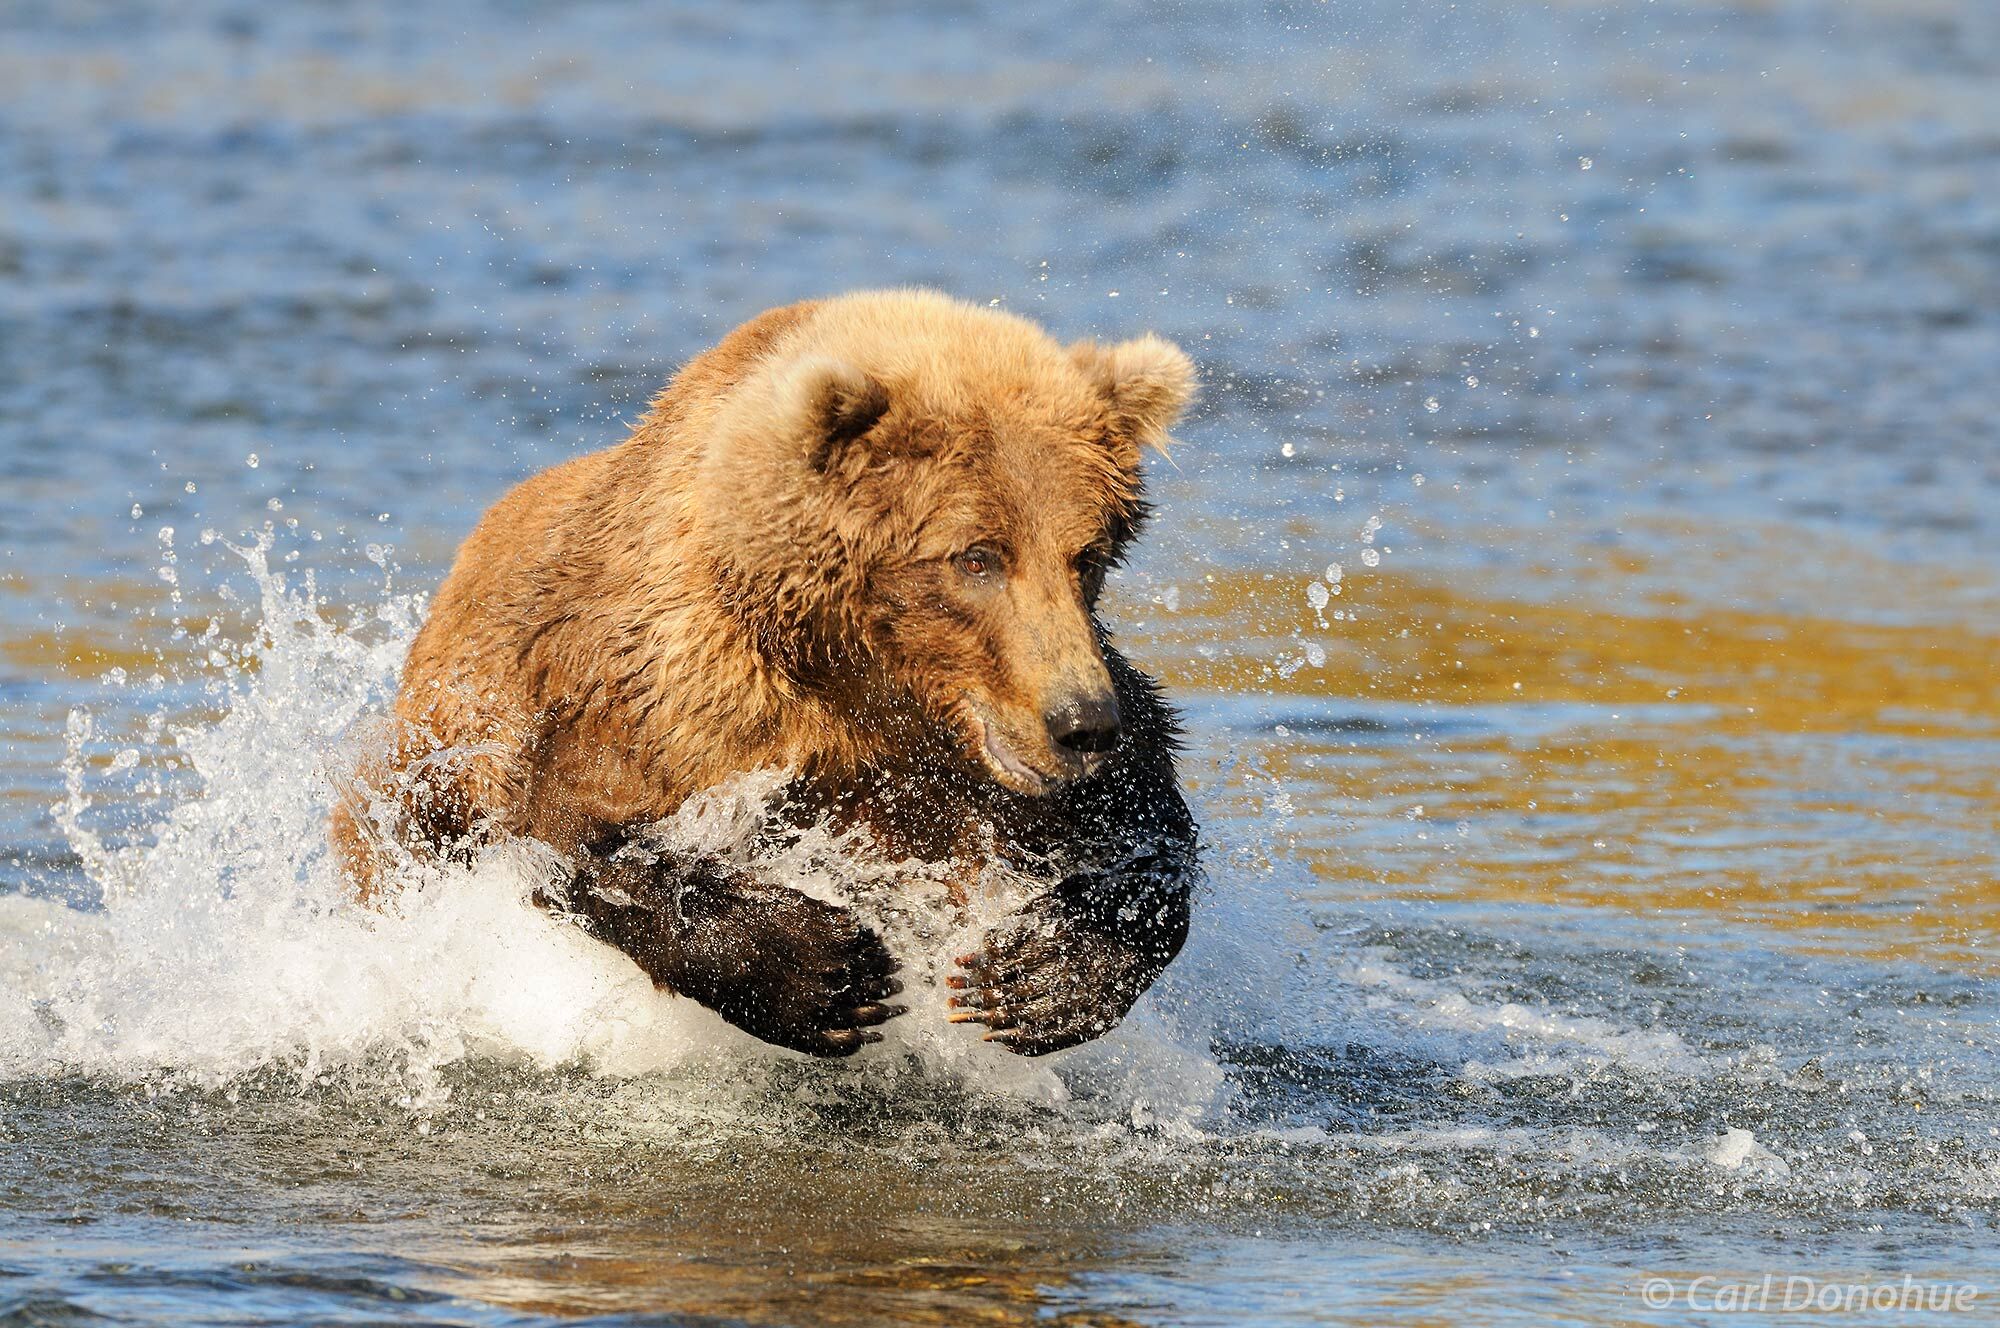 A brown bear (grizzly bear, Ursus arctos) chases a Sockeye Salmon through shallow water in Katmai National Park and Preserve...